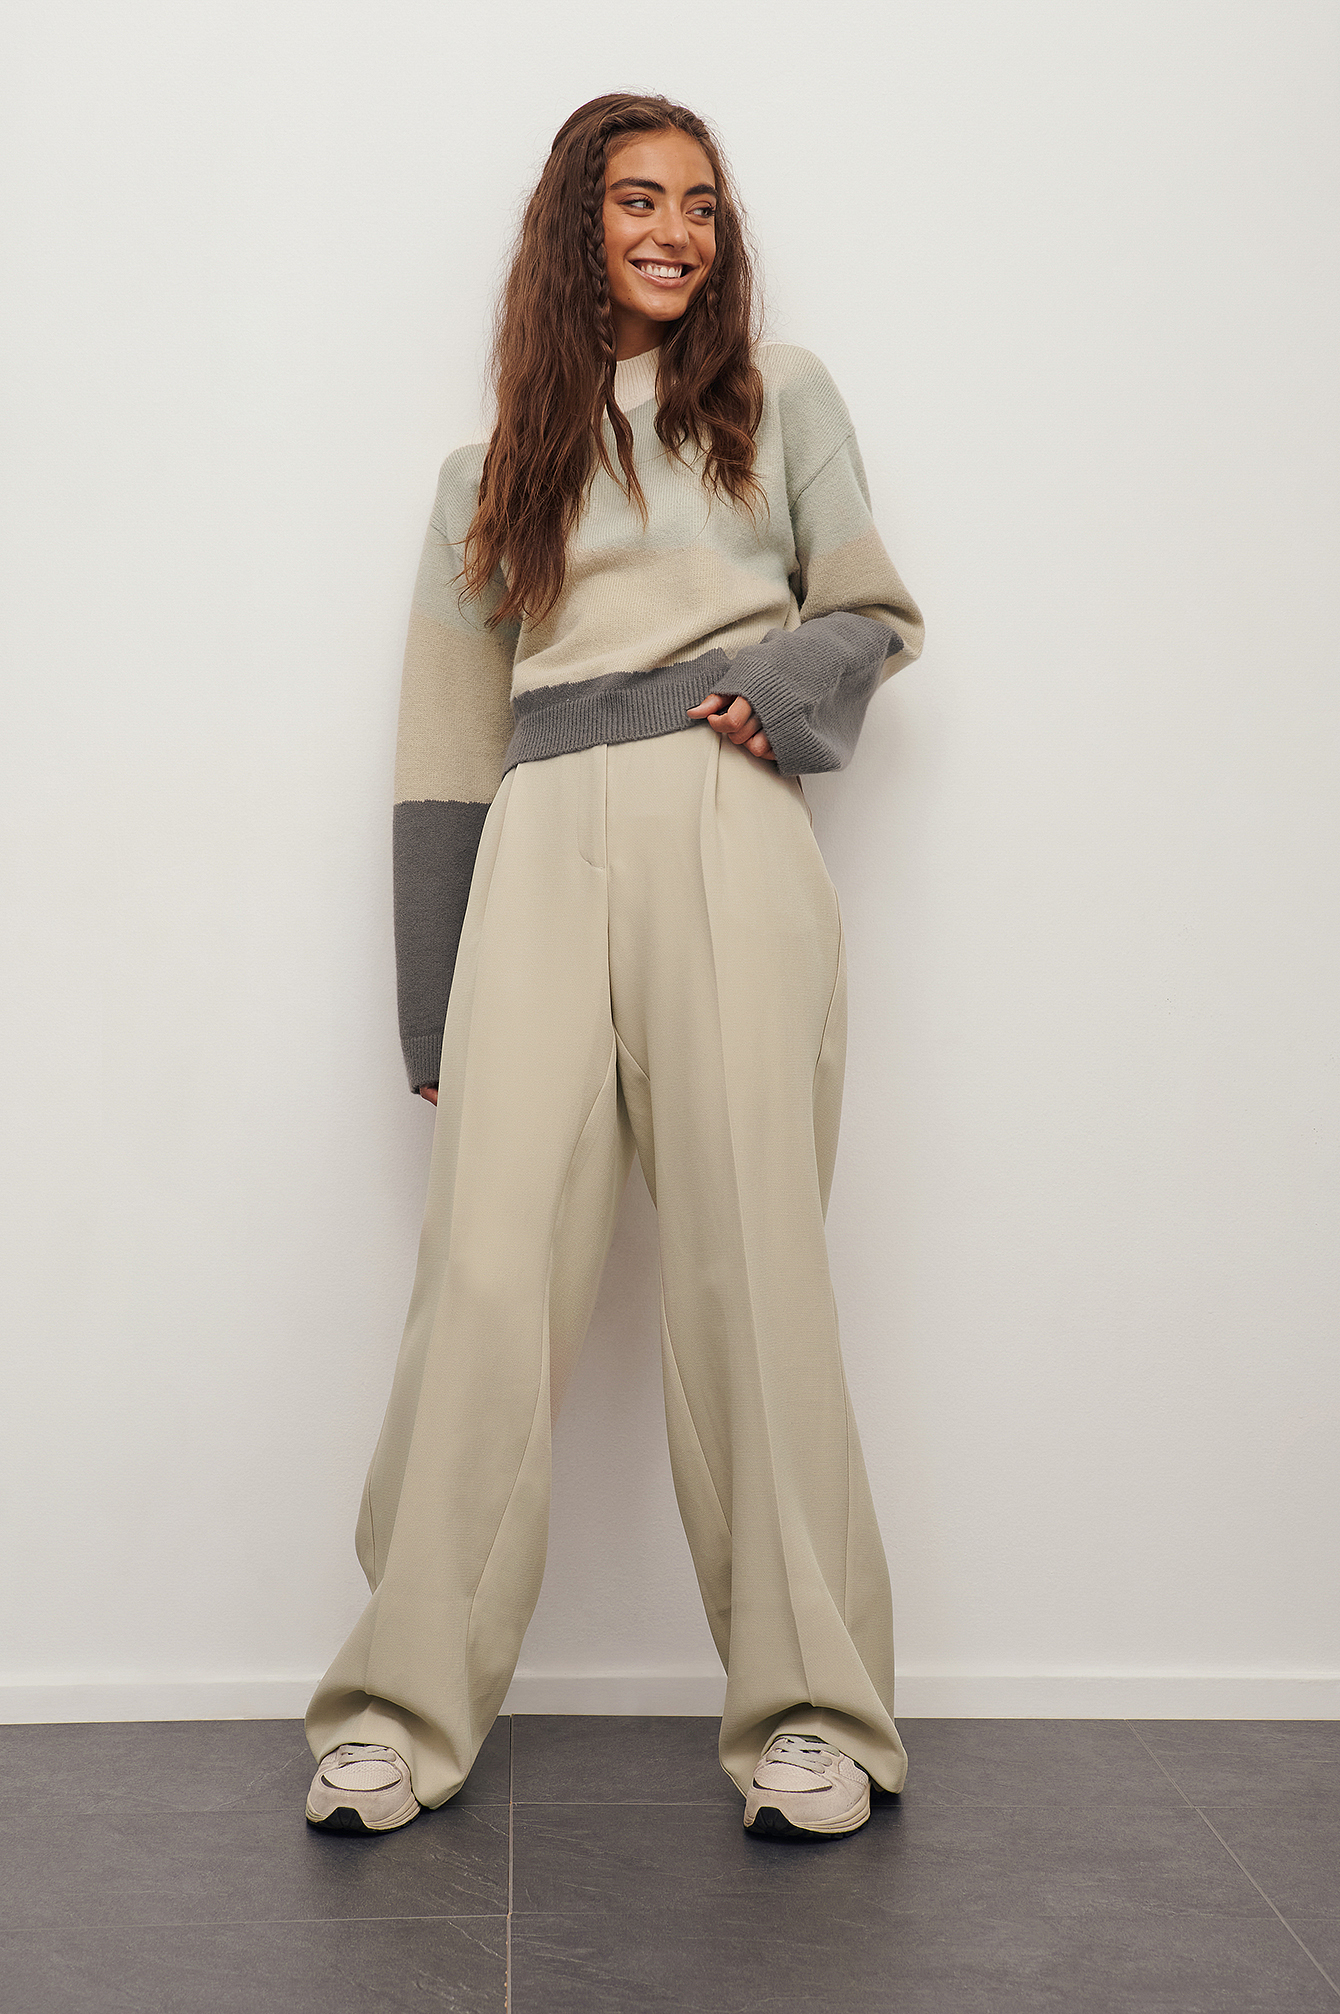 High Waist Loose Fit Pants Outfit.